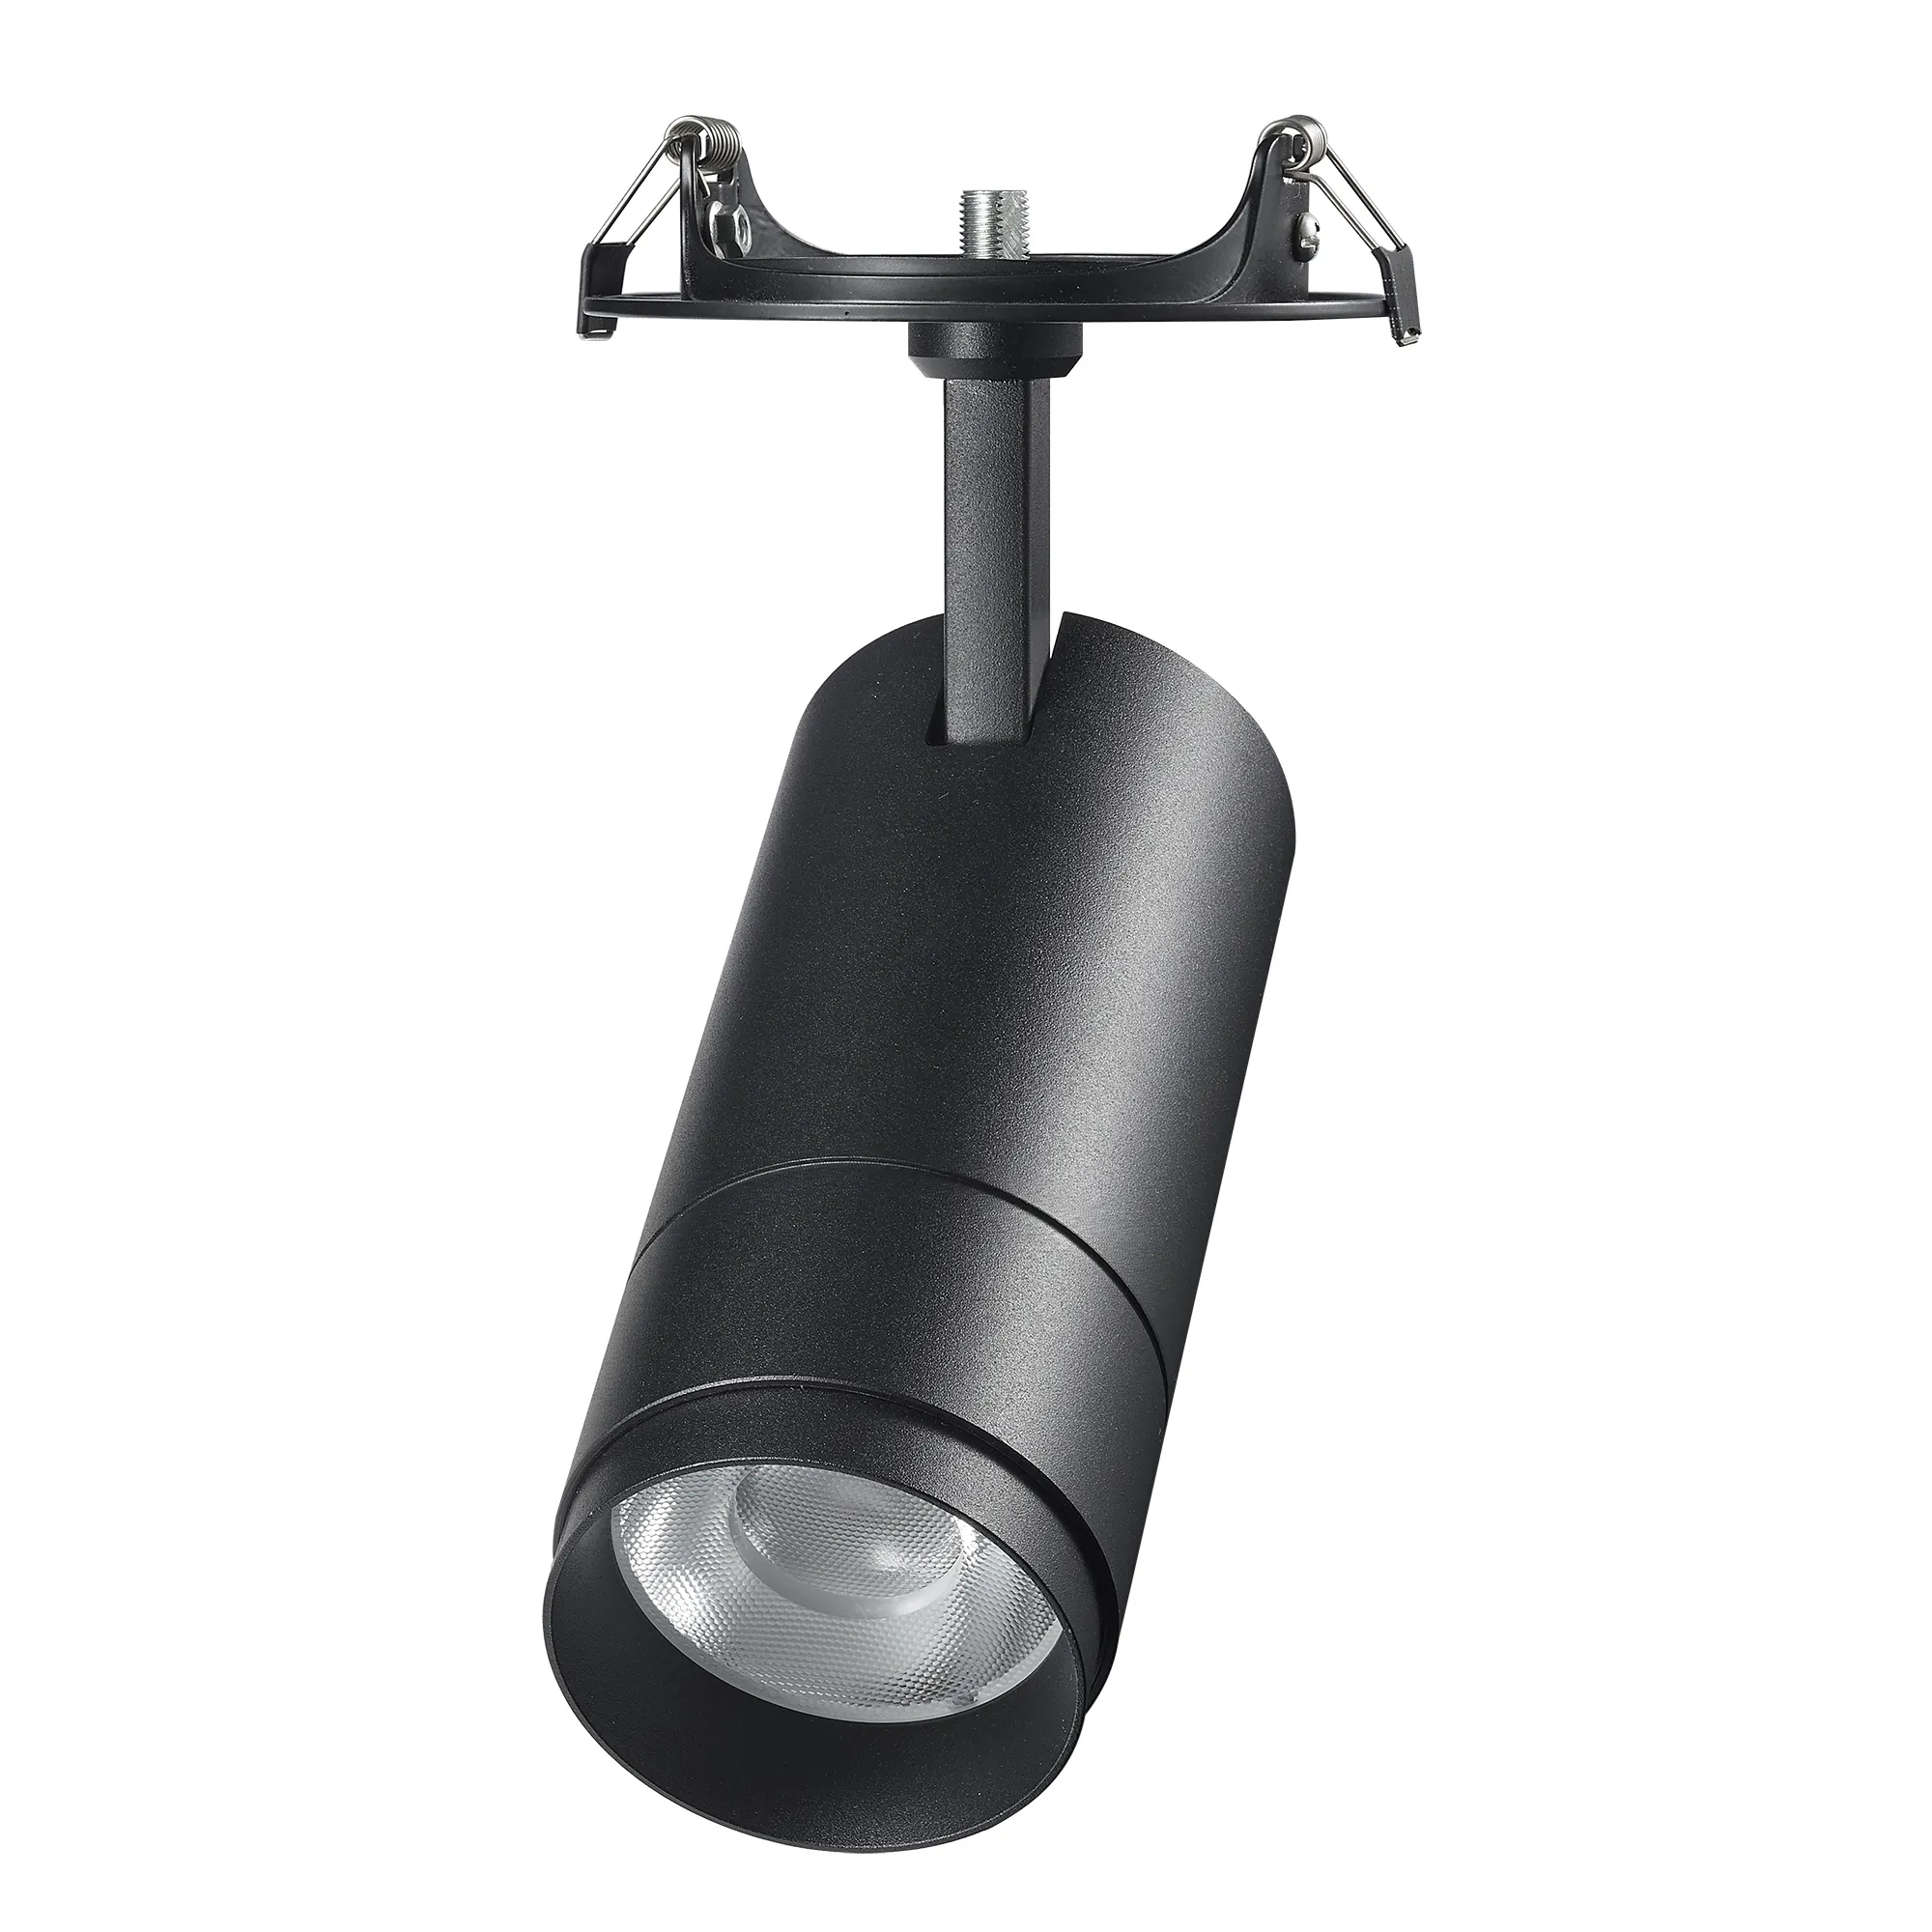 Daytonled Family Series CE SAA UKCA CRI90 CRI97 Commercial Architectural Recessed Surface Mount dali led track light